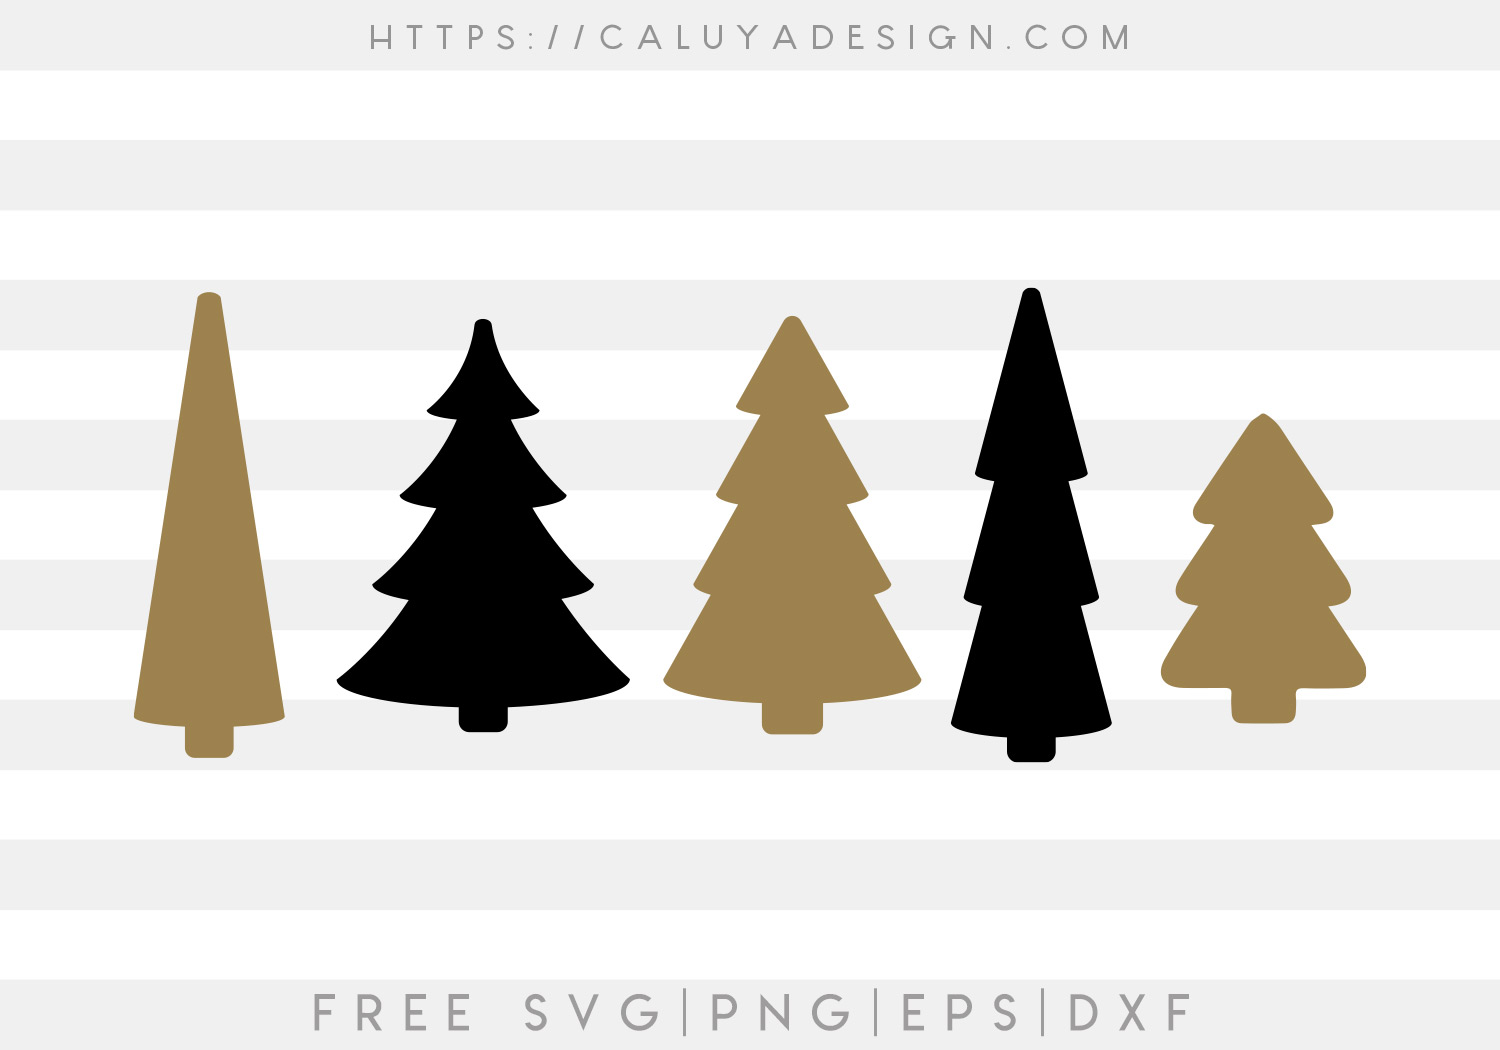 Free SVG & PNG Download Gallery by Caluya Design